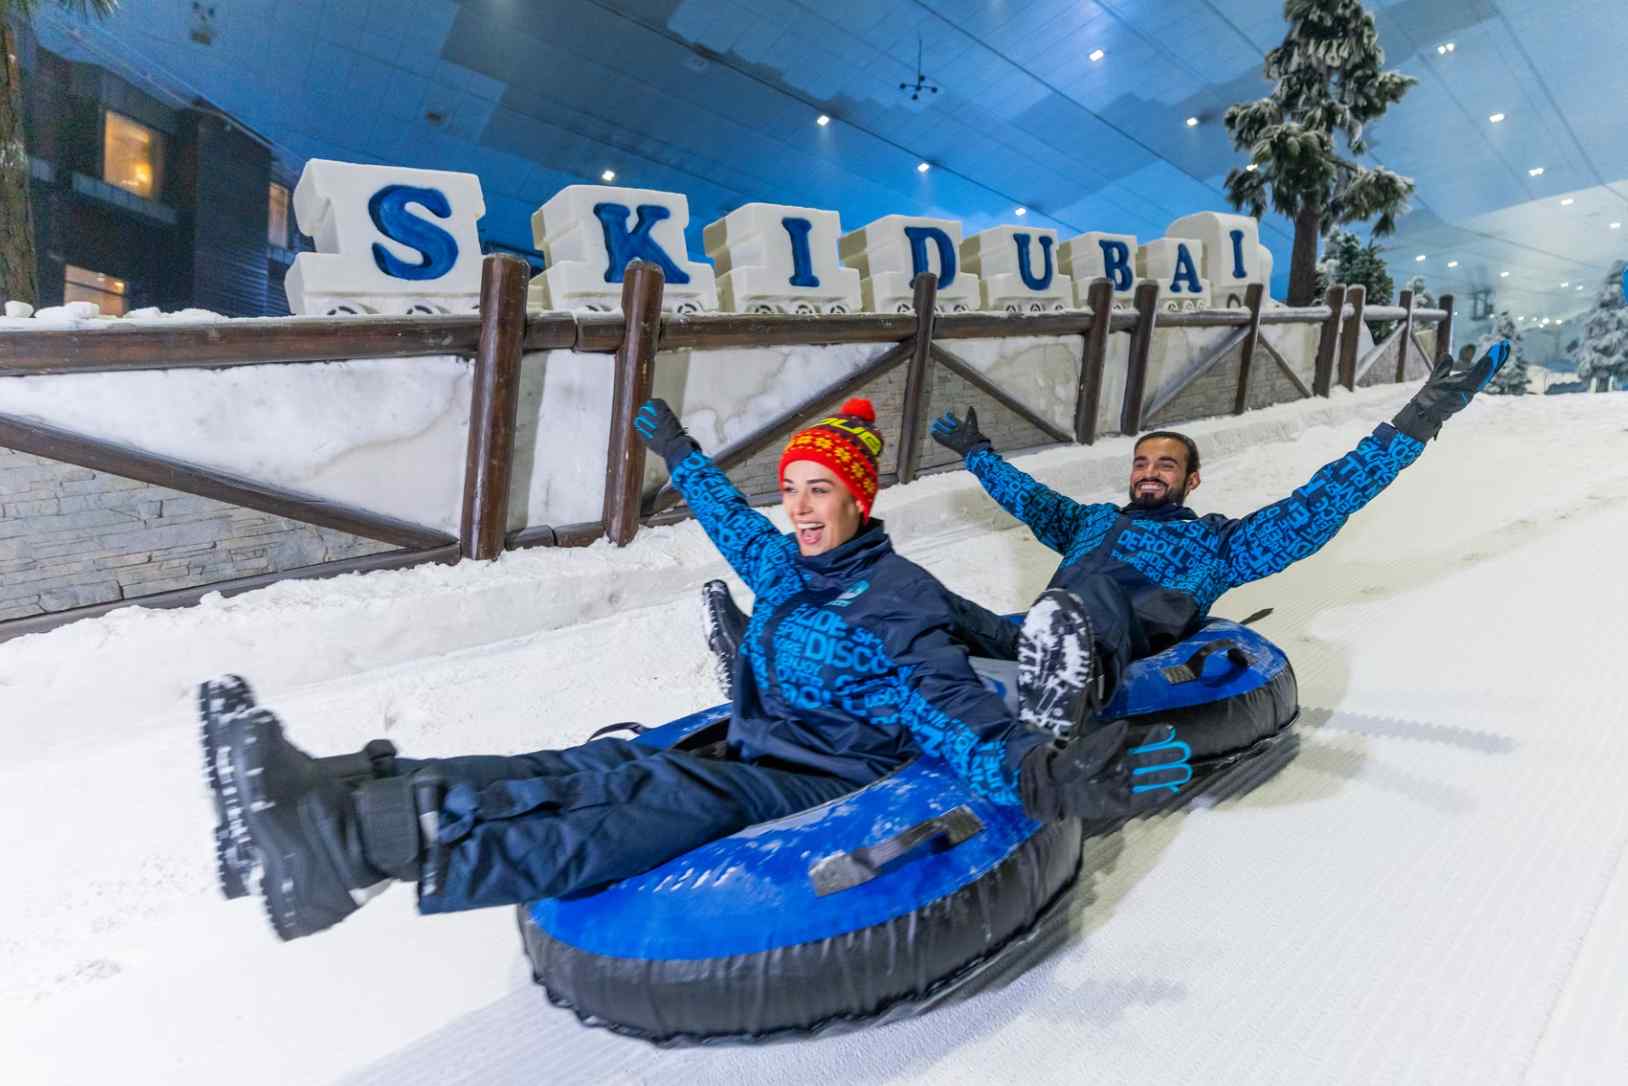 Gear up for a budget-friendly 2-hour indoor snowboarding or skiing session at Ski Dubai.